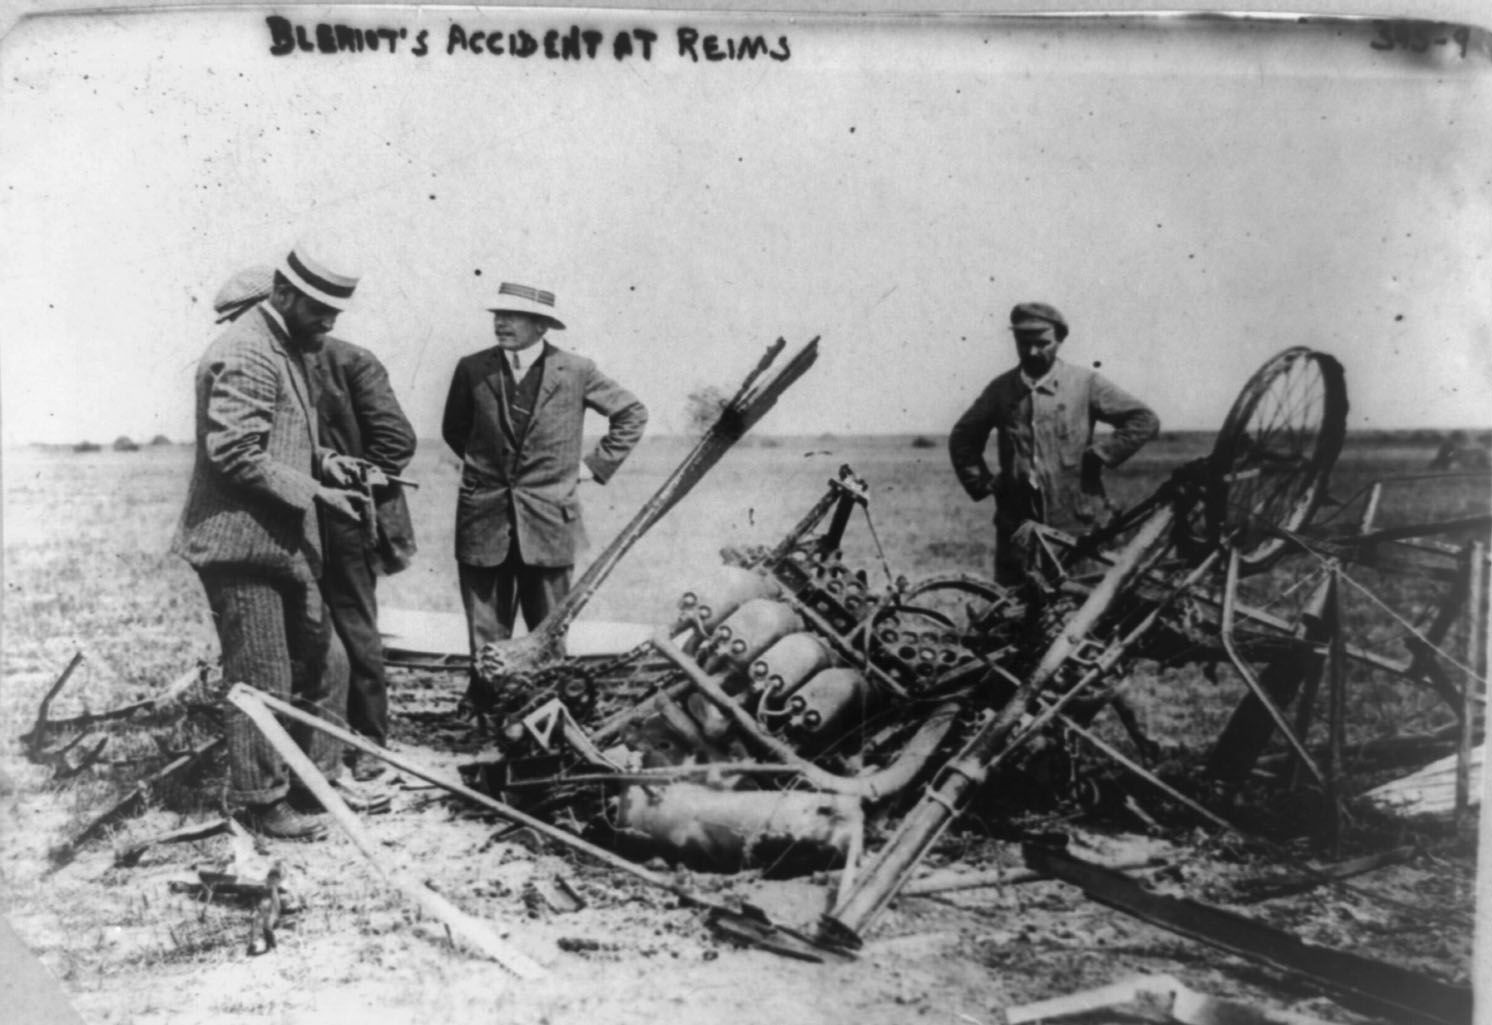 Bleriot's accident at Reims